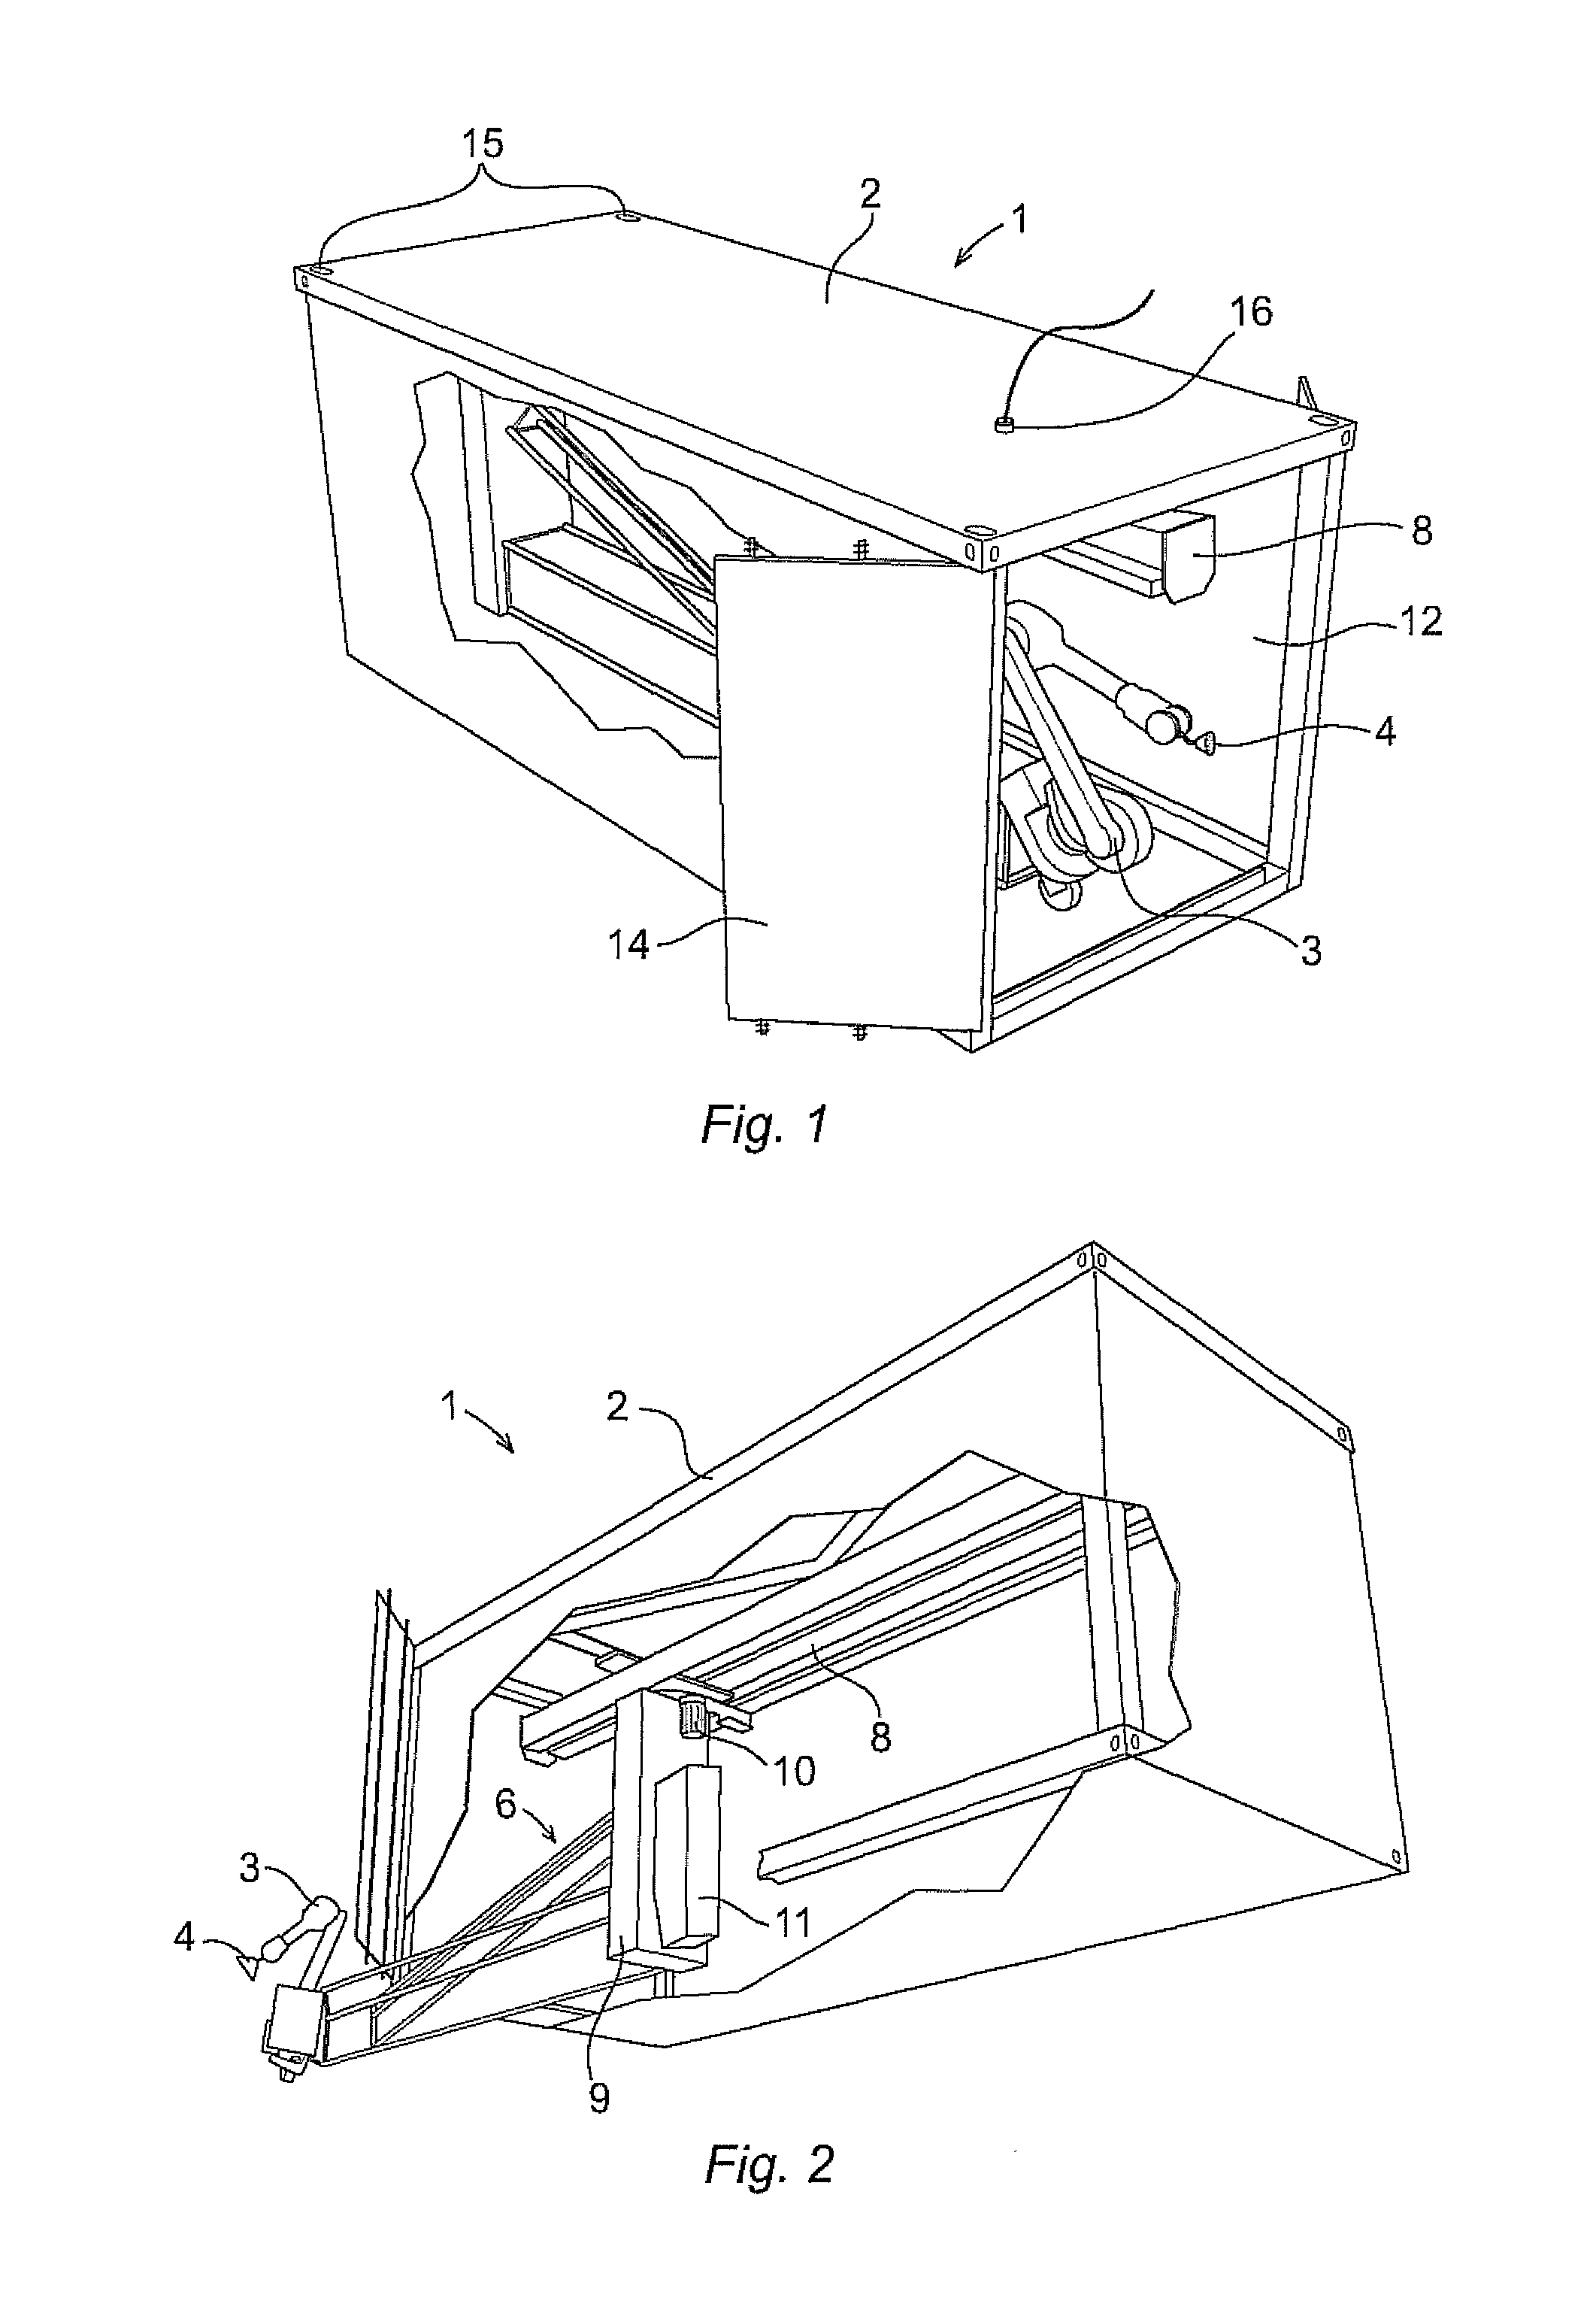 System, tool and method for cleaning the interior of a freight container